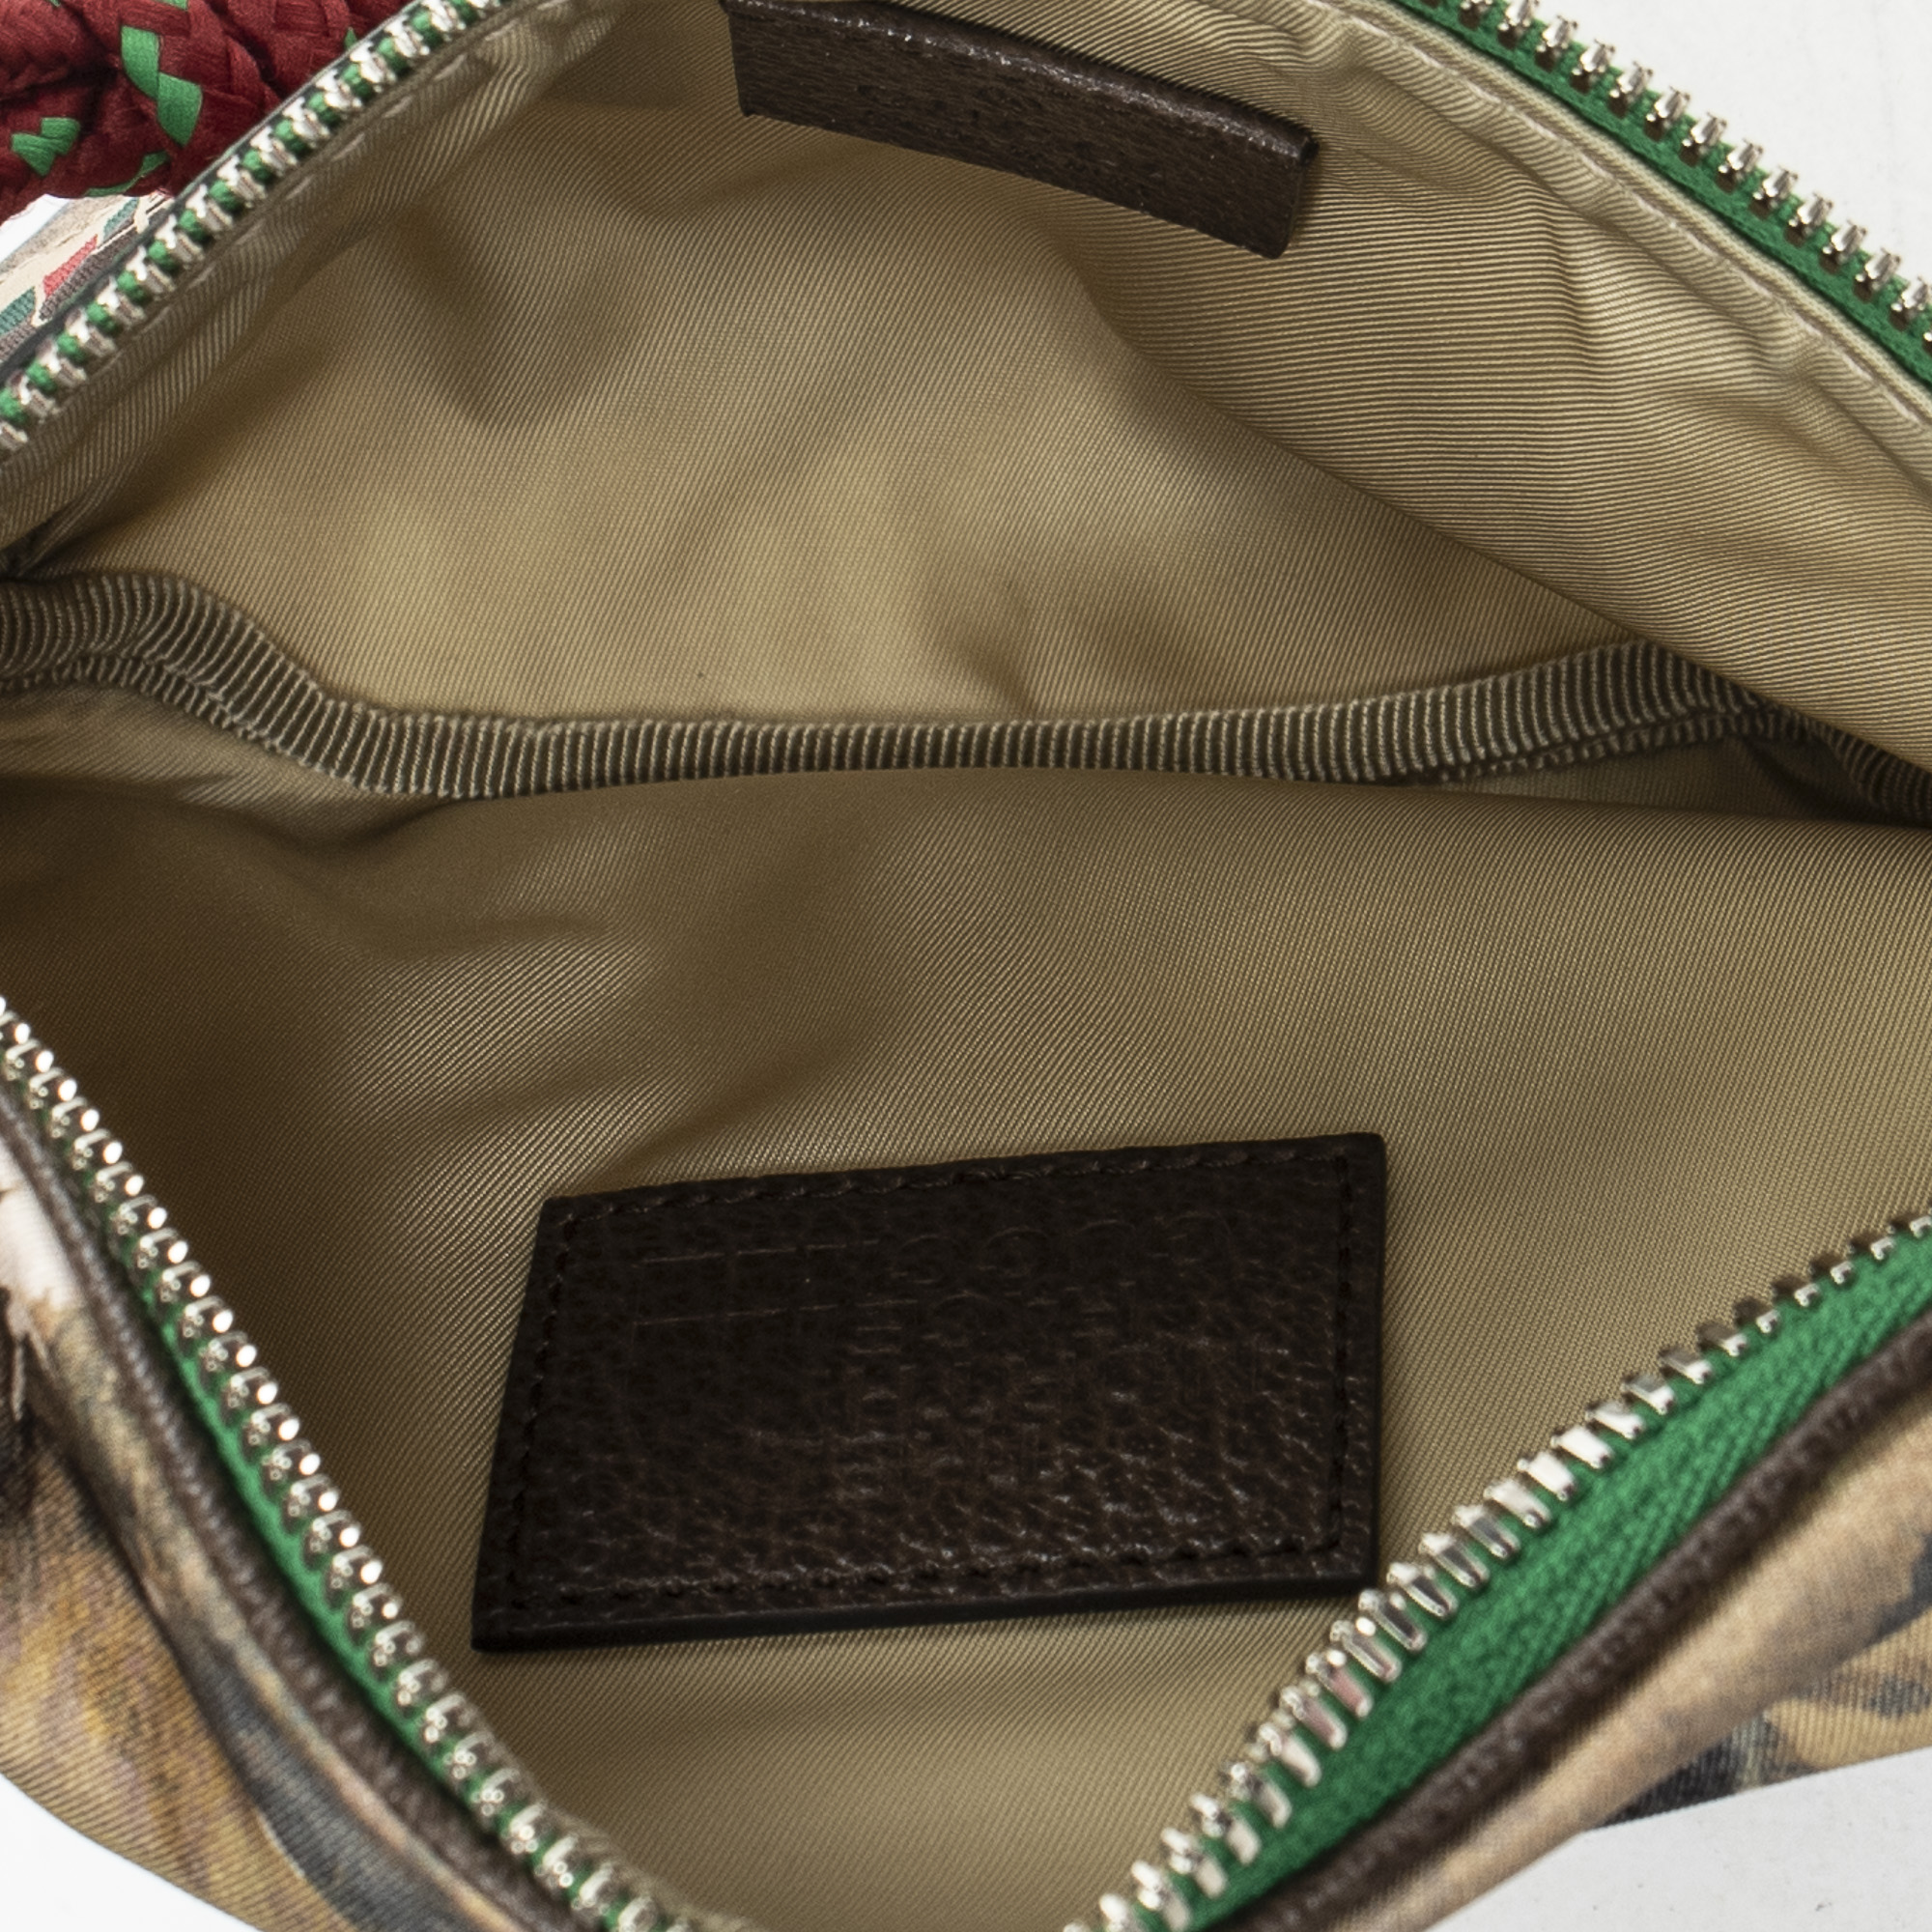 The North Face x Gucci Authenticated Bag